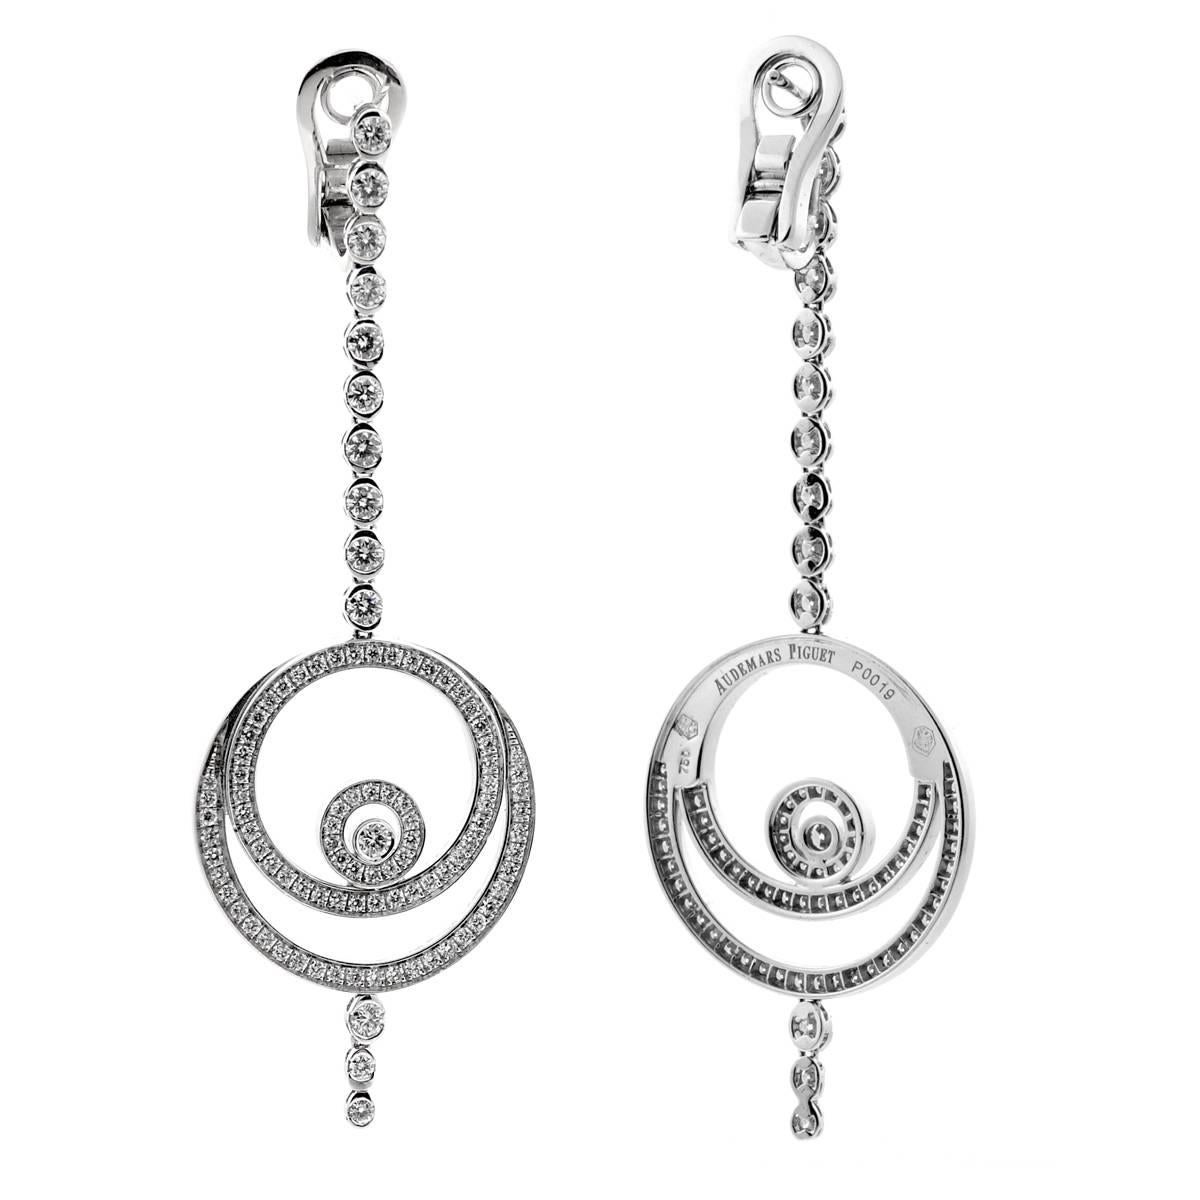 An pair of iconic Audemars Piguet diamond drop earrings featuring the timeless Millenary design in 18k white gold adorned with the finest round brilliant cut diamonds in 18k white gold.

Sku: 868
